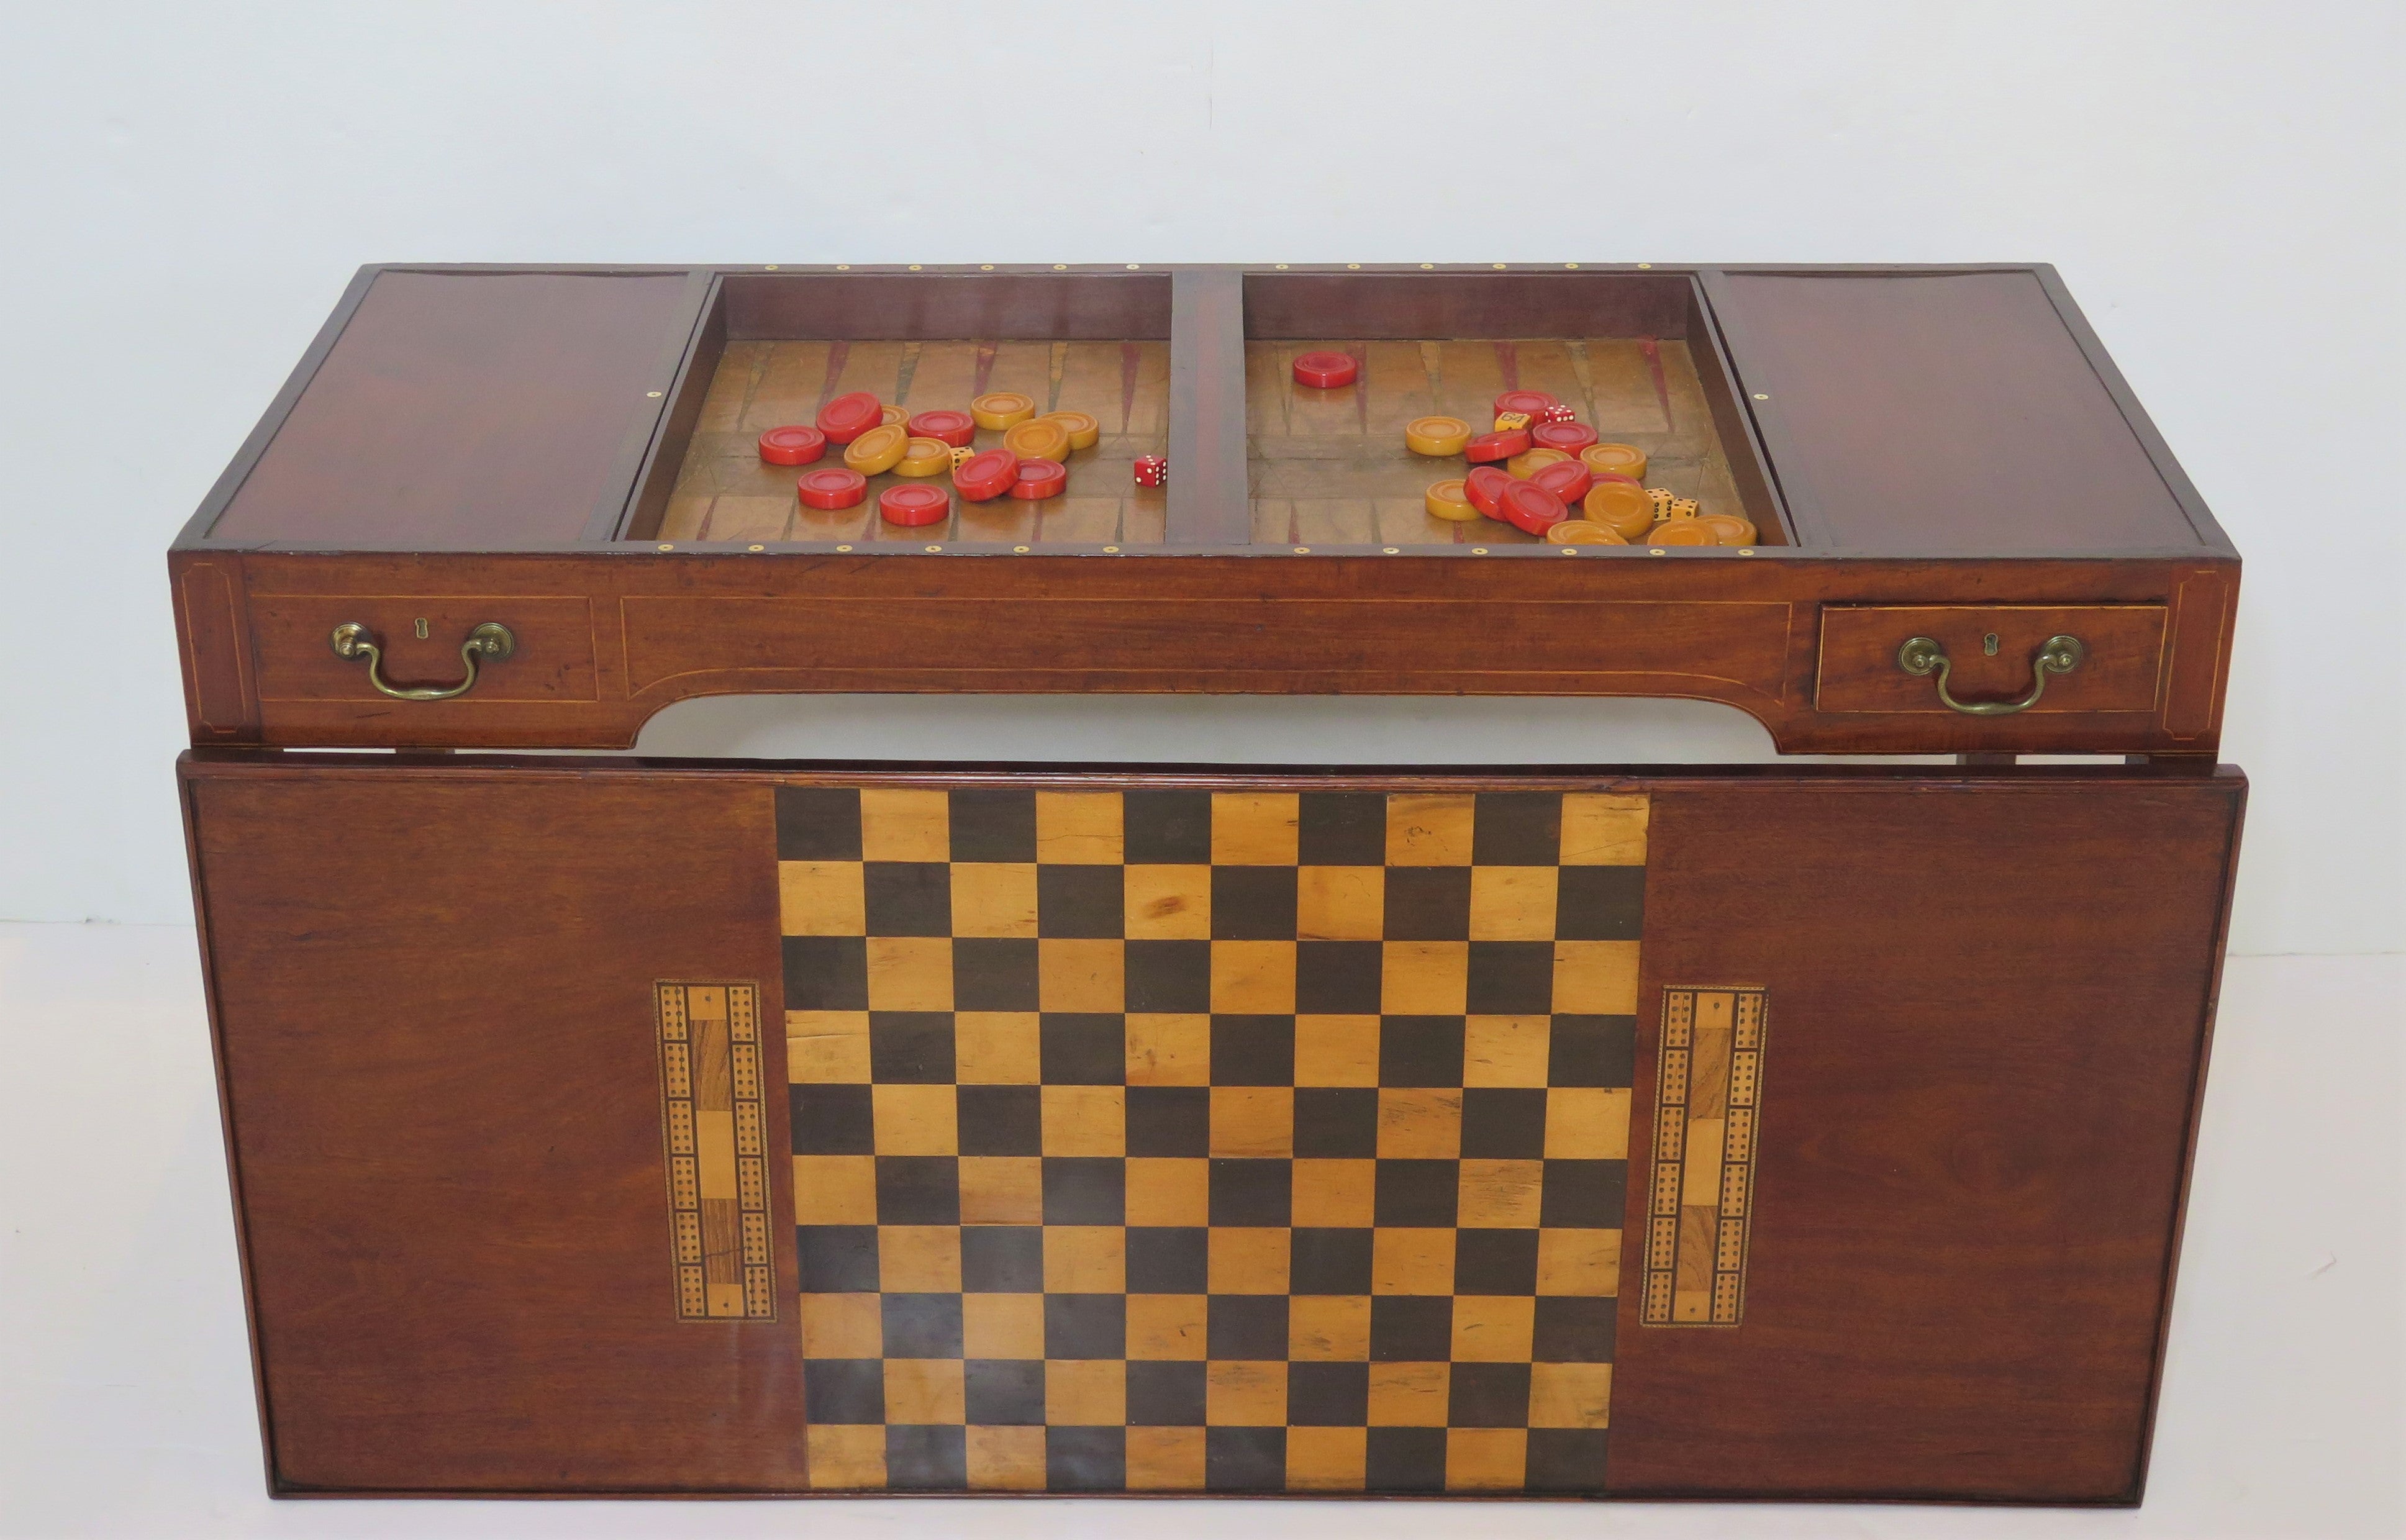 A Fine George III Tric-Trac Games / Writing Table